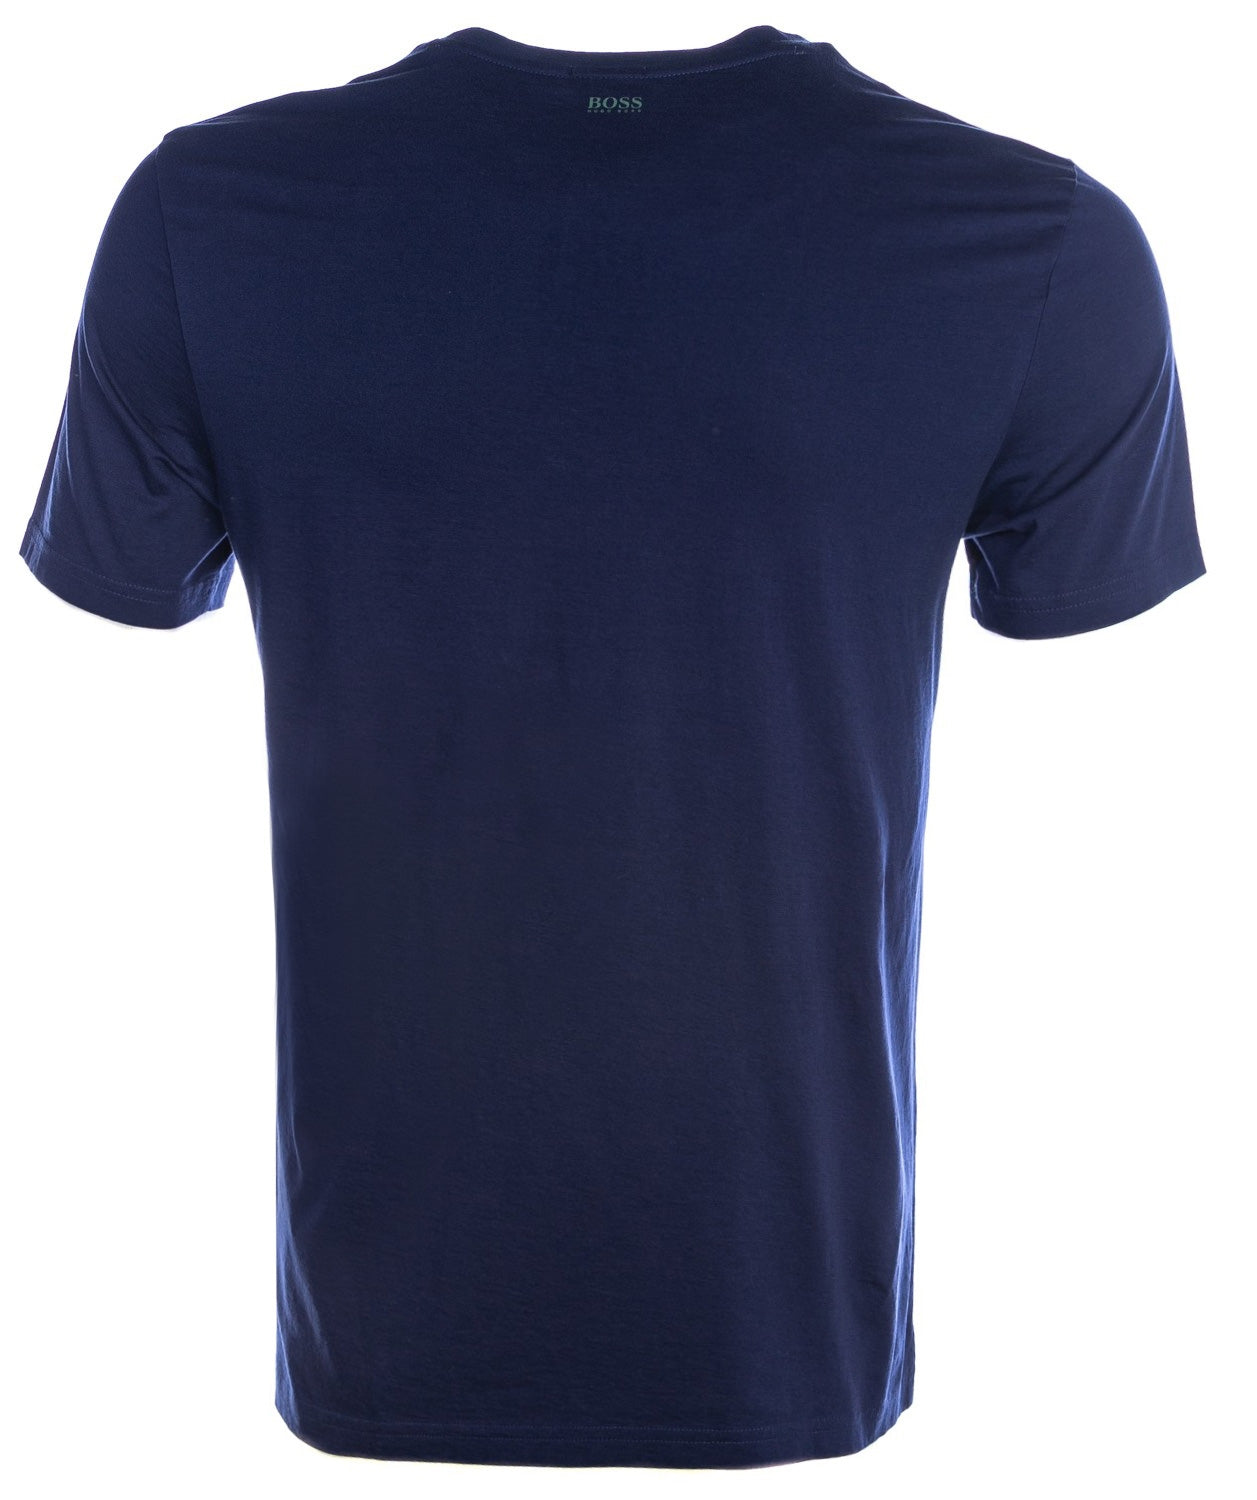 BOSS Tejungle 1 T Shirt in Navy